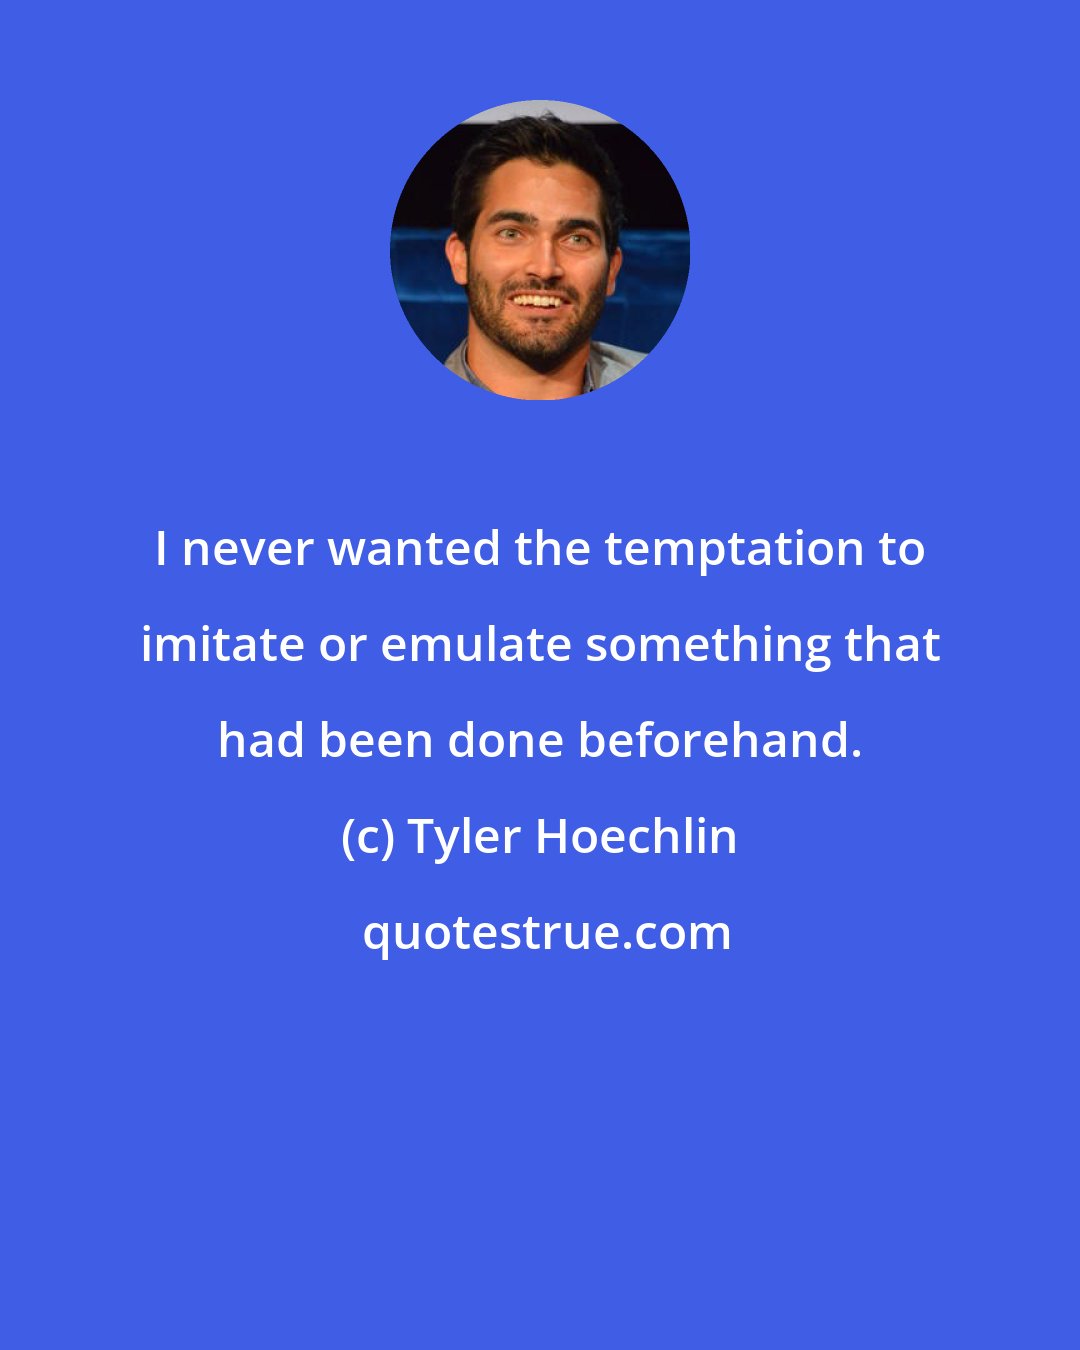 Tyler Hoechlin: I never wanted the temptation to imitate or emulate something that had been done beforehand.